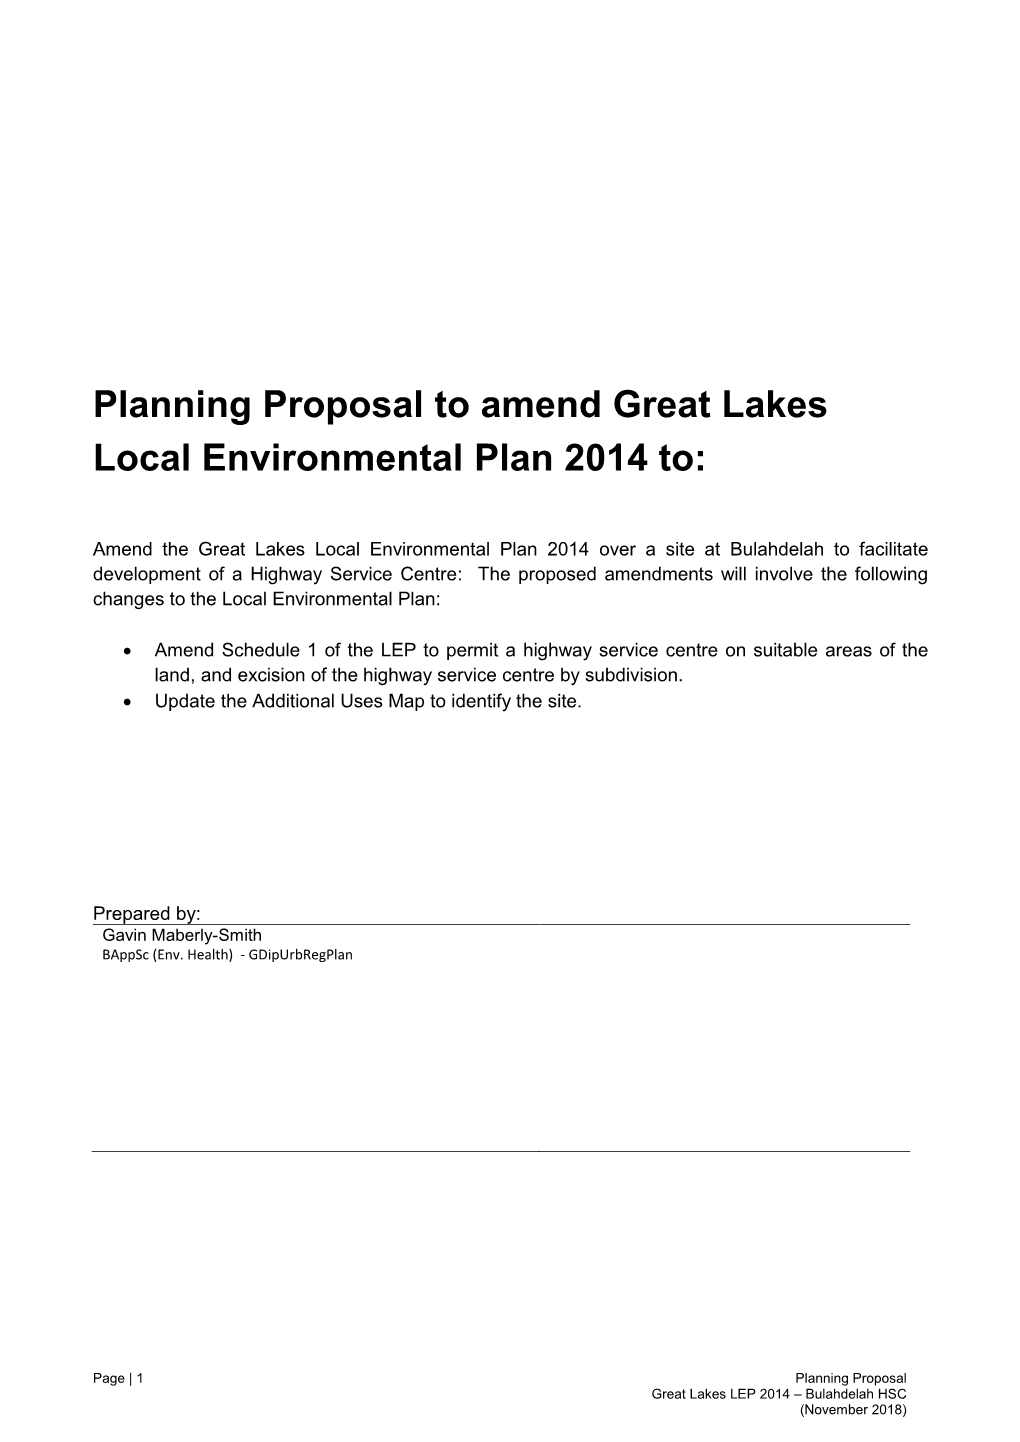 Planning Proposal to Amend Great Lakes Local Environmental Plan 2014 To